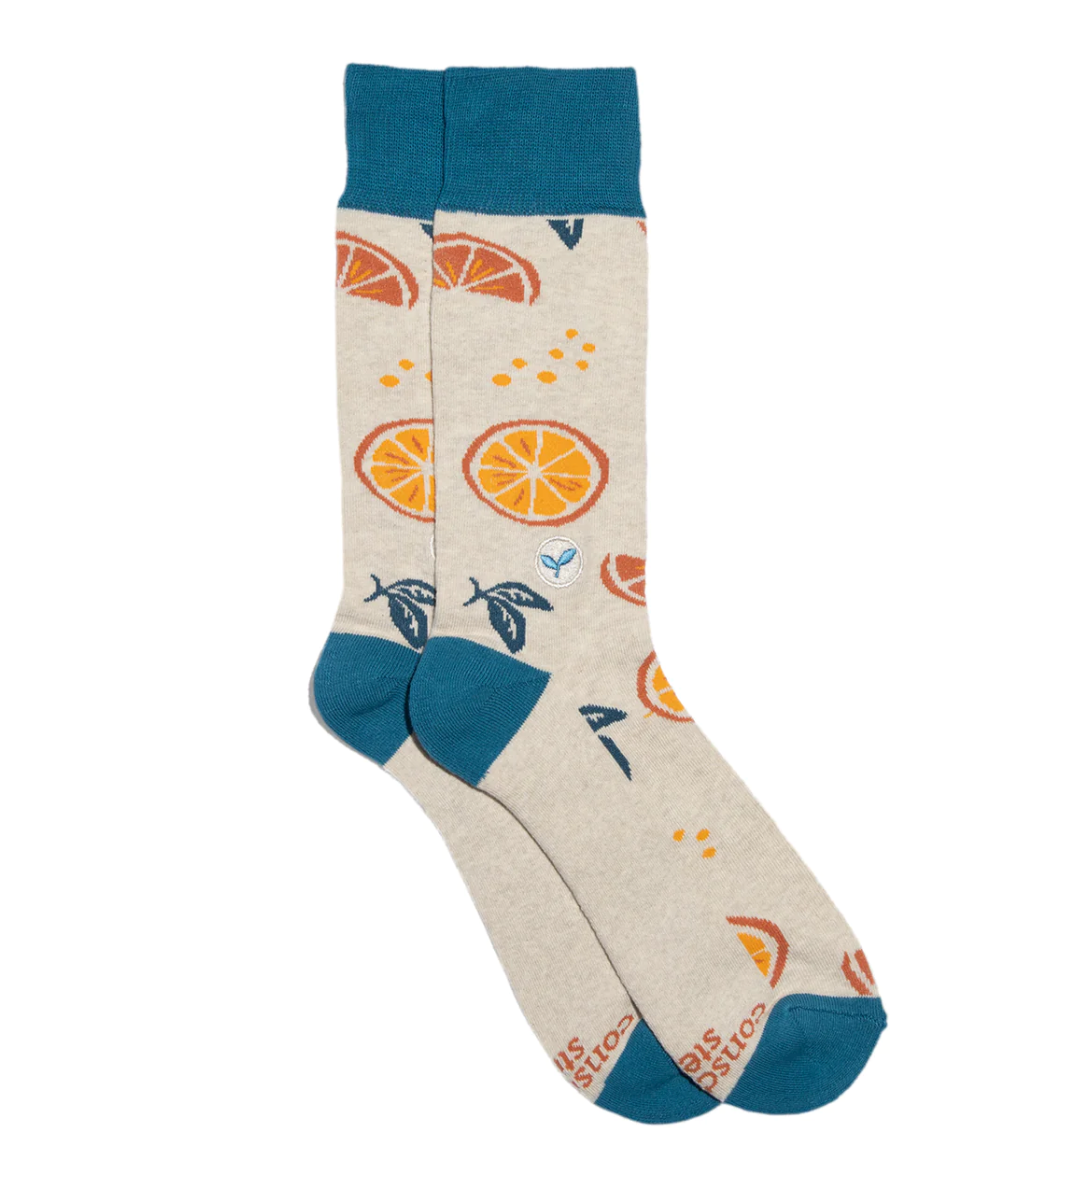 Socks That Plant Trees - Fresh Squeeze